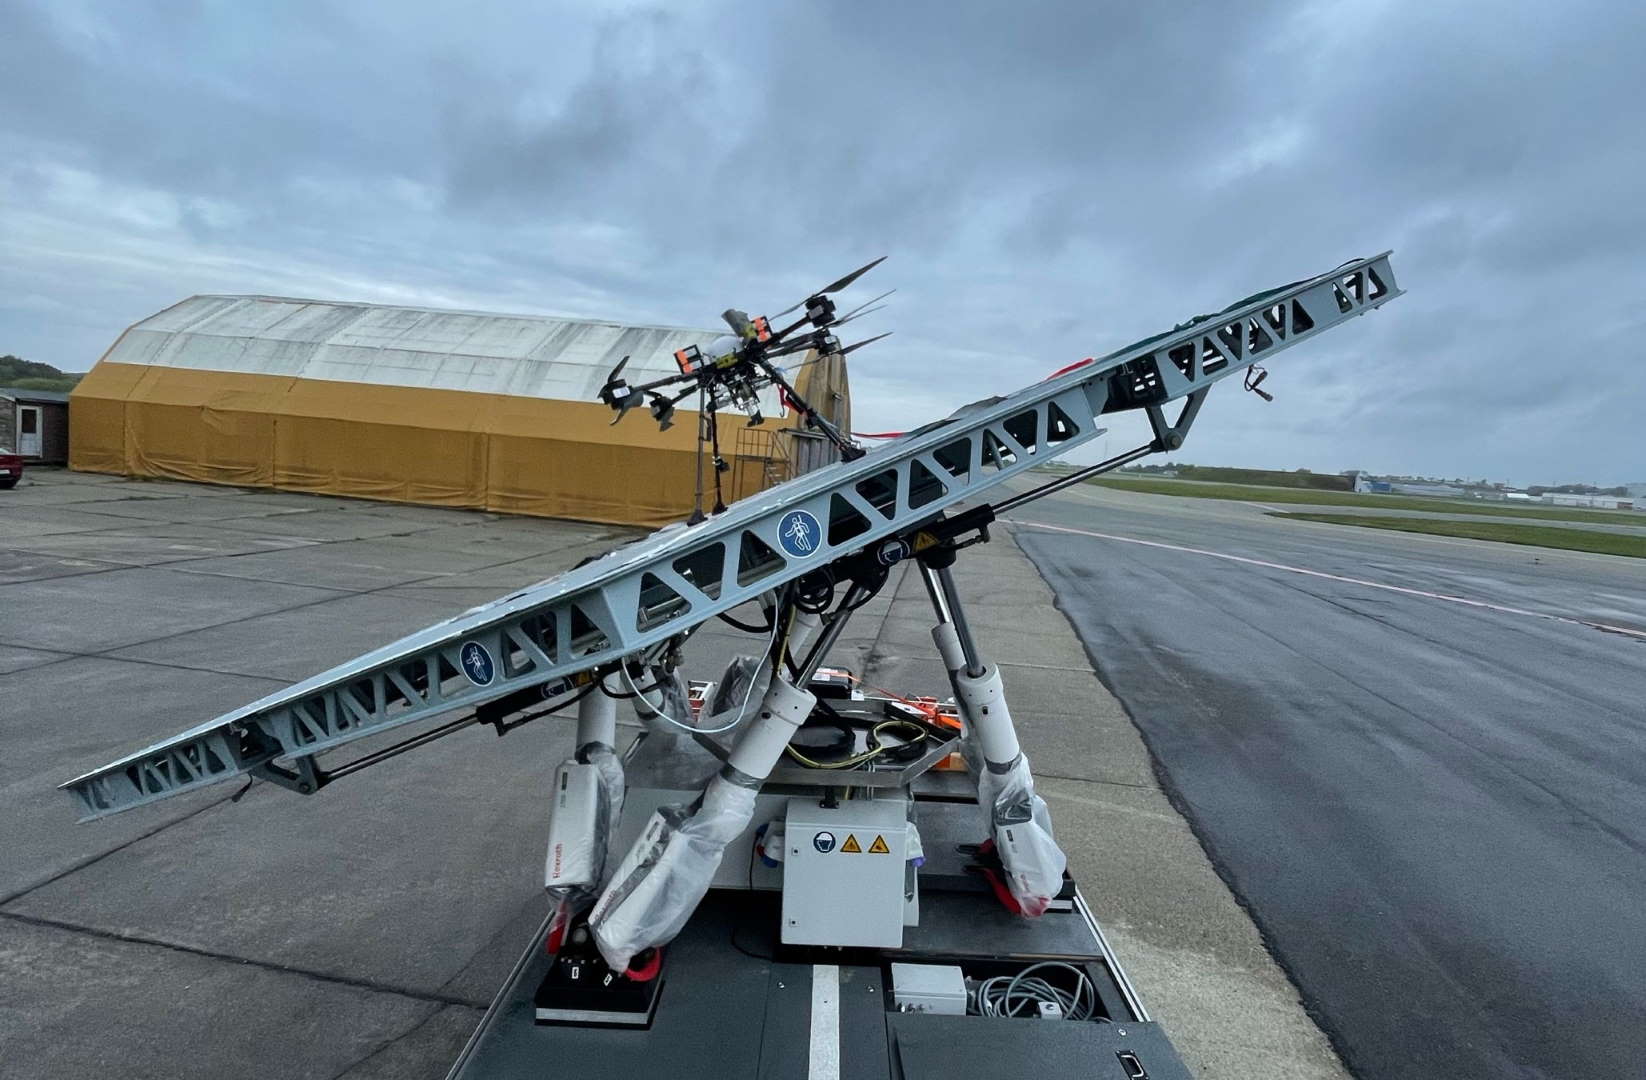 Equinor and Nordic Unmanned begin the world’s first offshore logistics operations utilizing drones. – sUAS Information